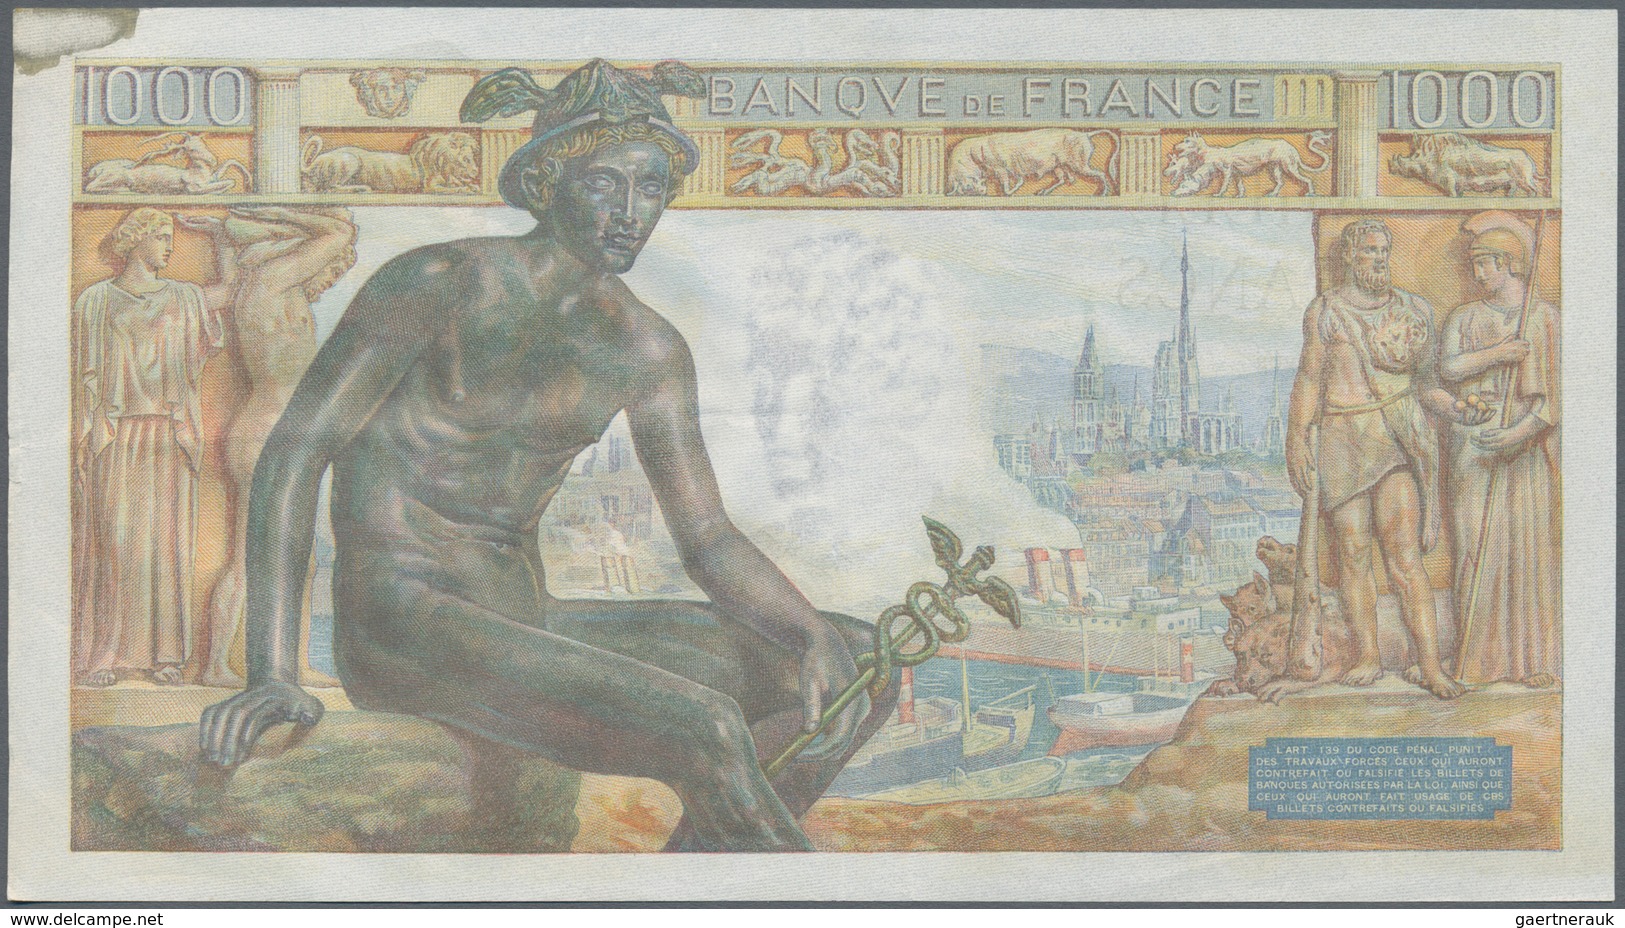 France / Frankreich: set of 14 notes containing CONSECUTIVE sets of 1000 Francs "Demeter" 1943 P. 10